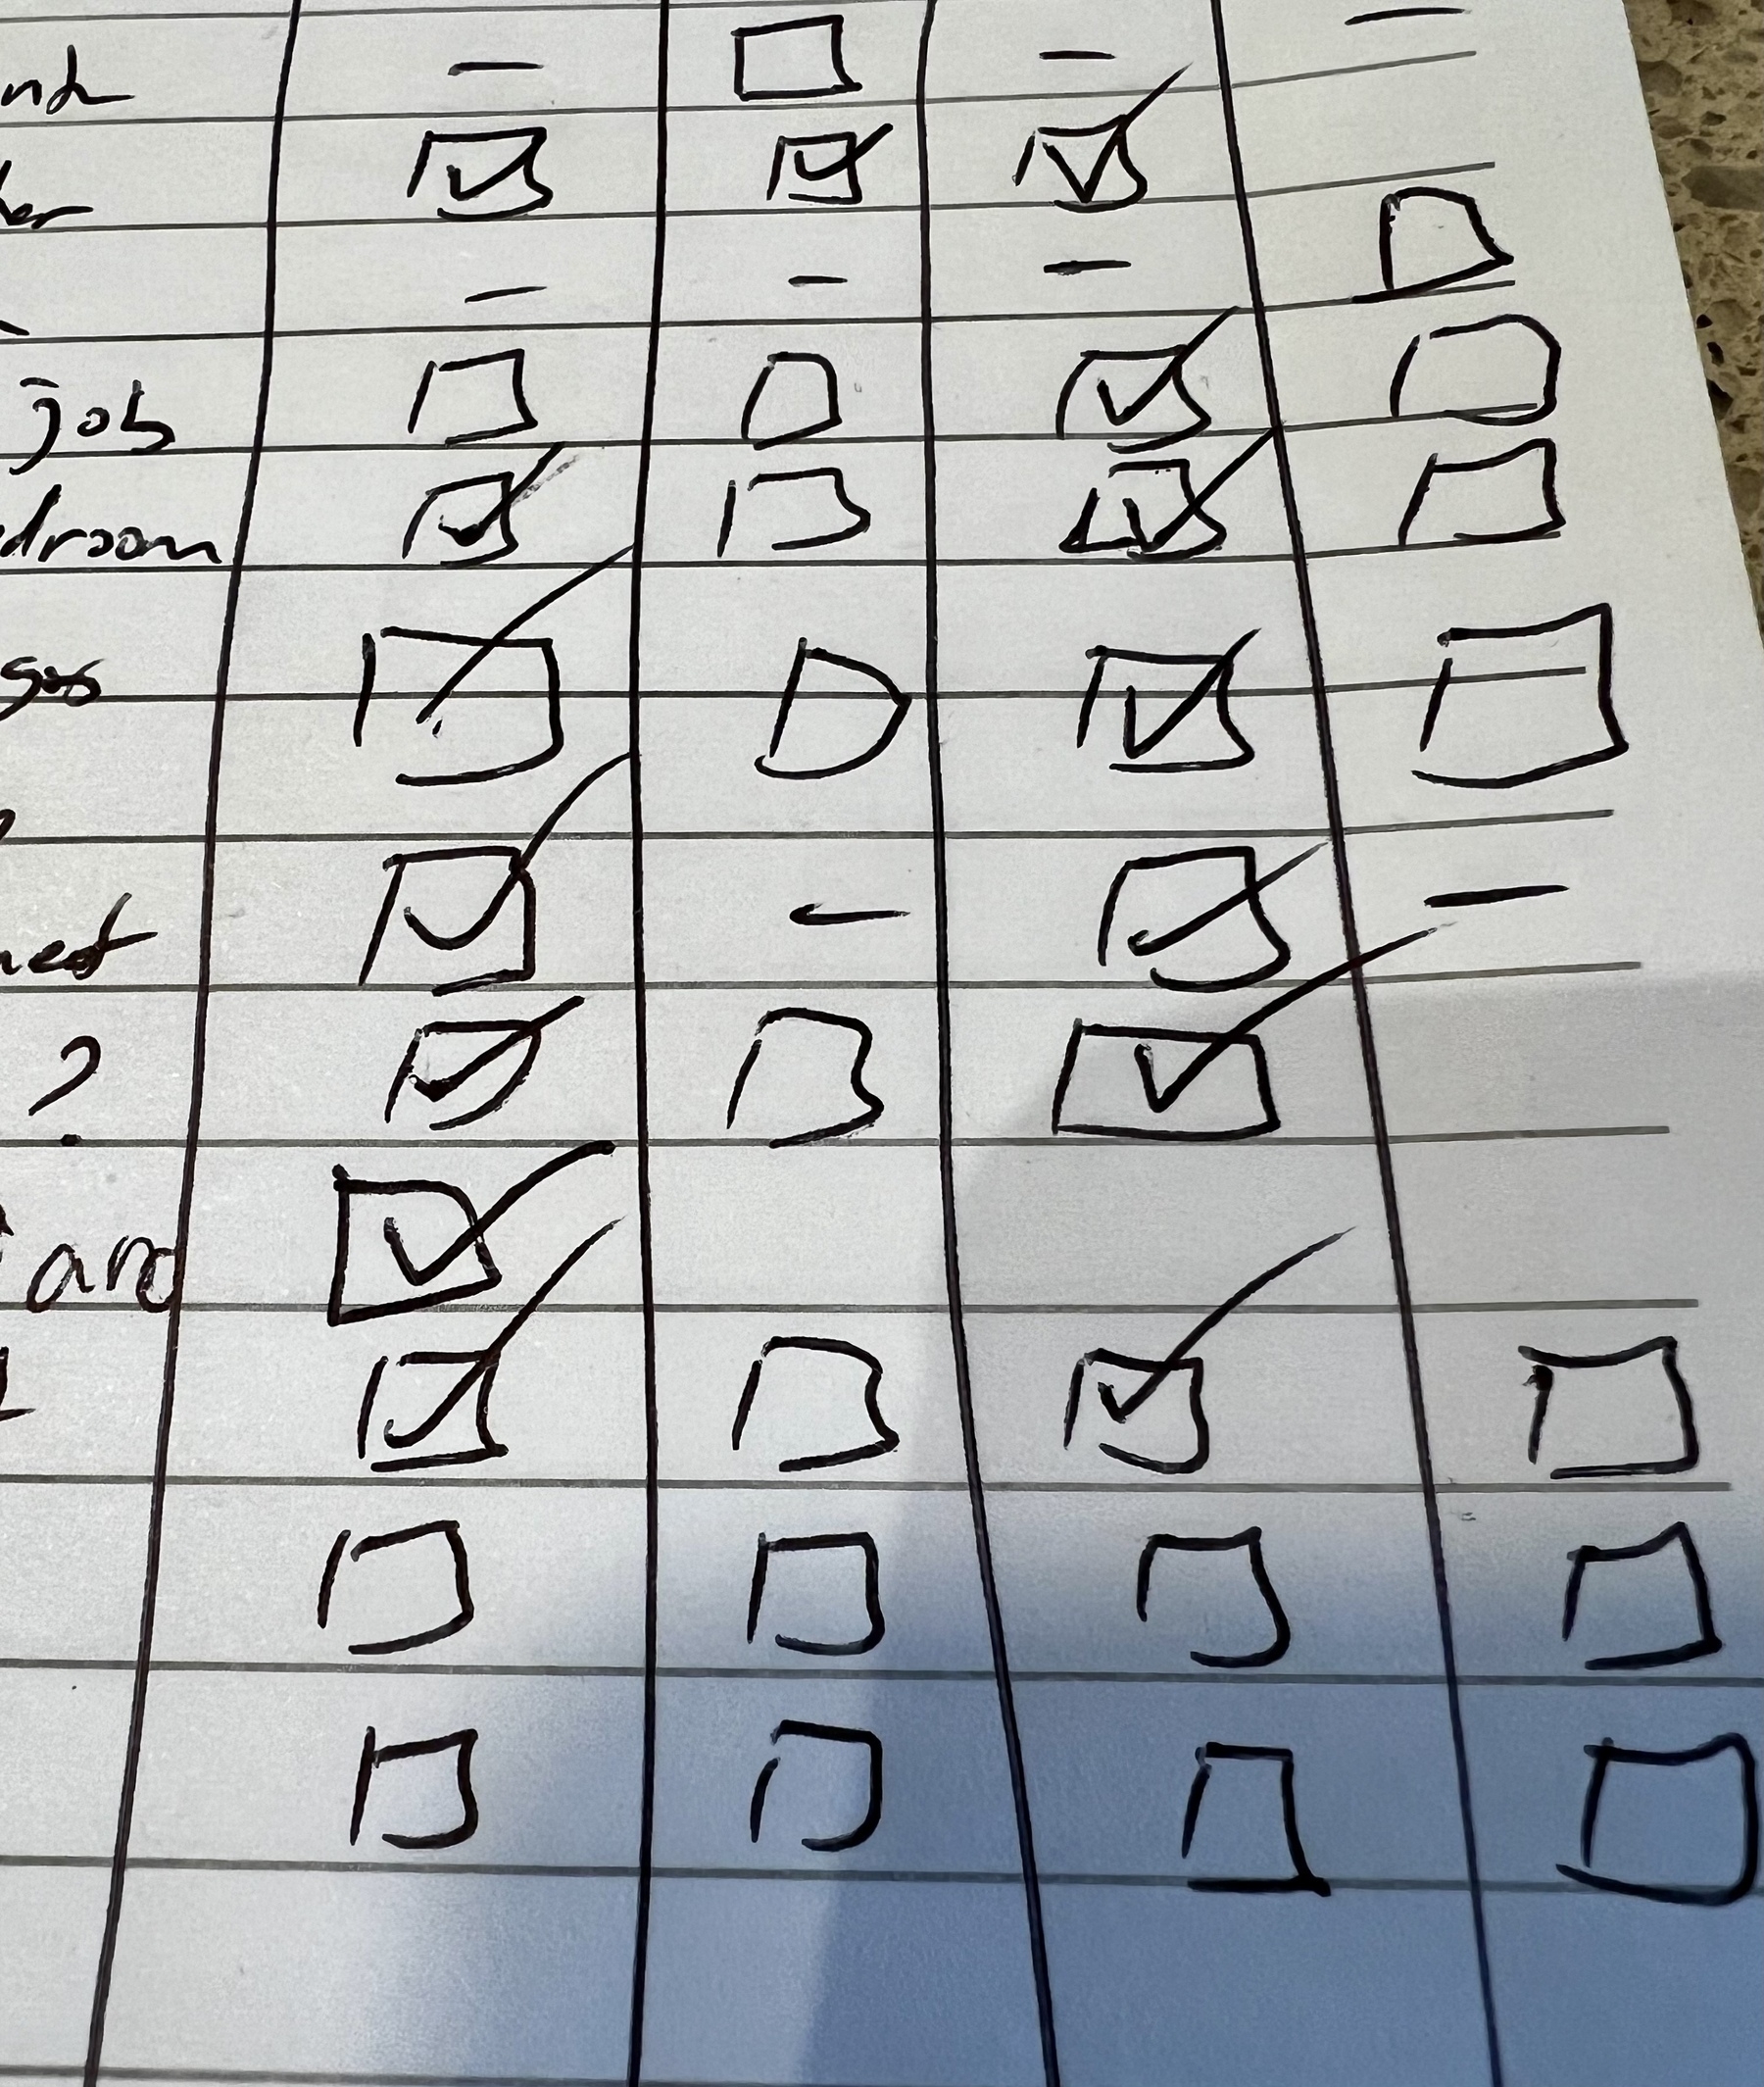 A hand written list with four columns and checkboxes in each row, half of which are checked. 